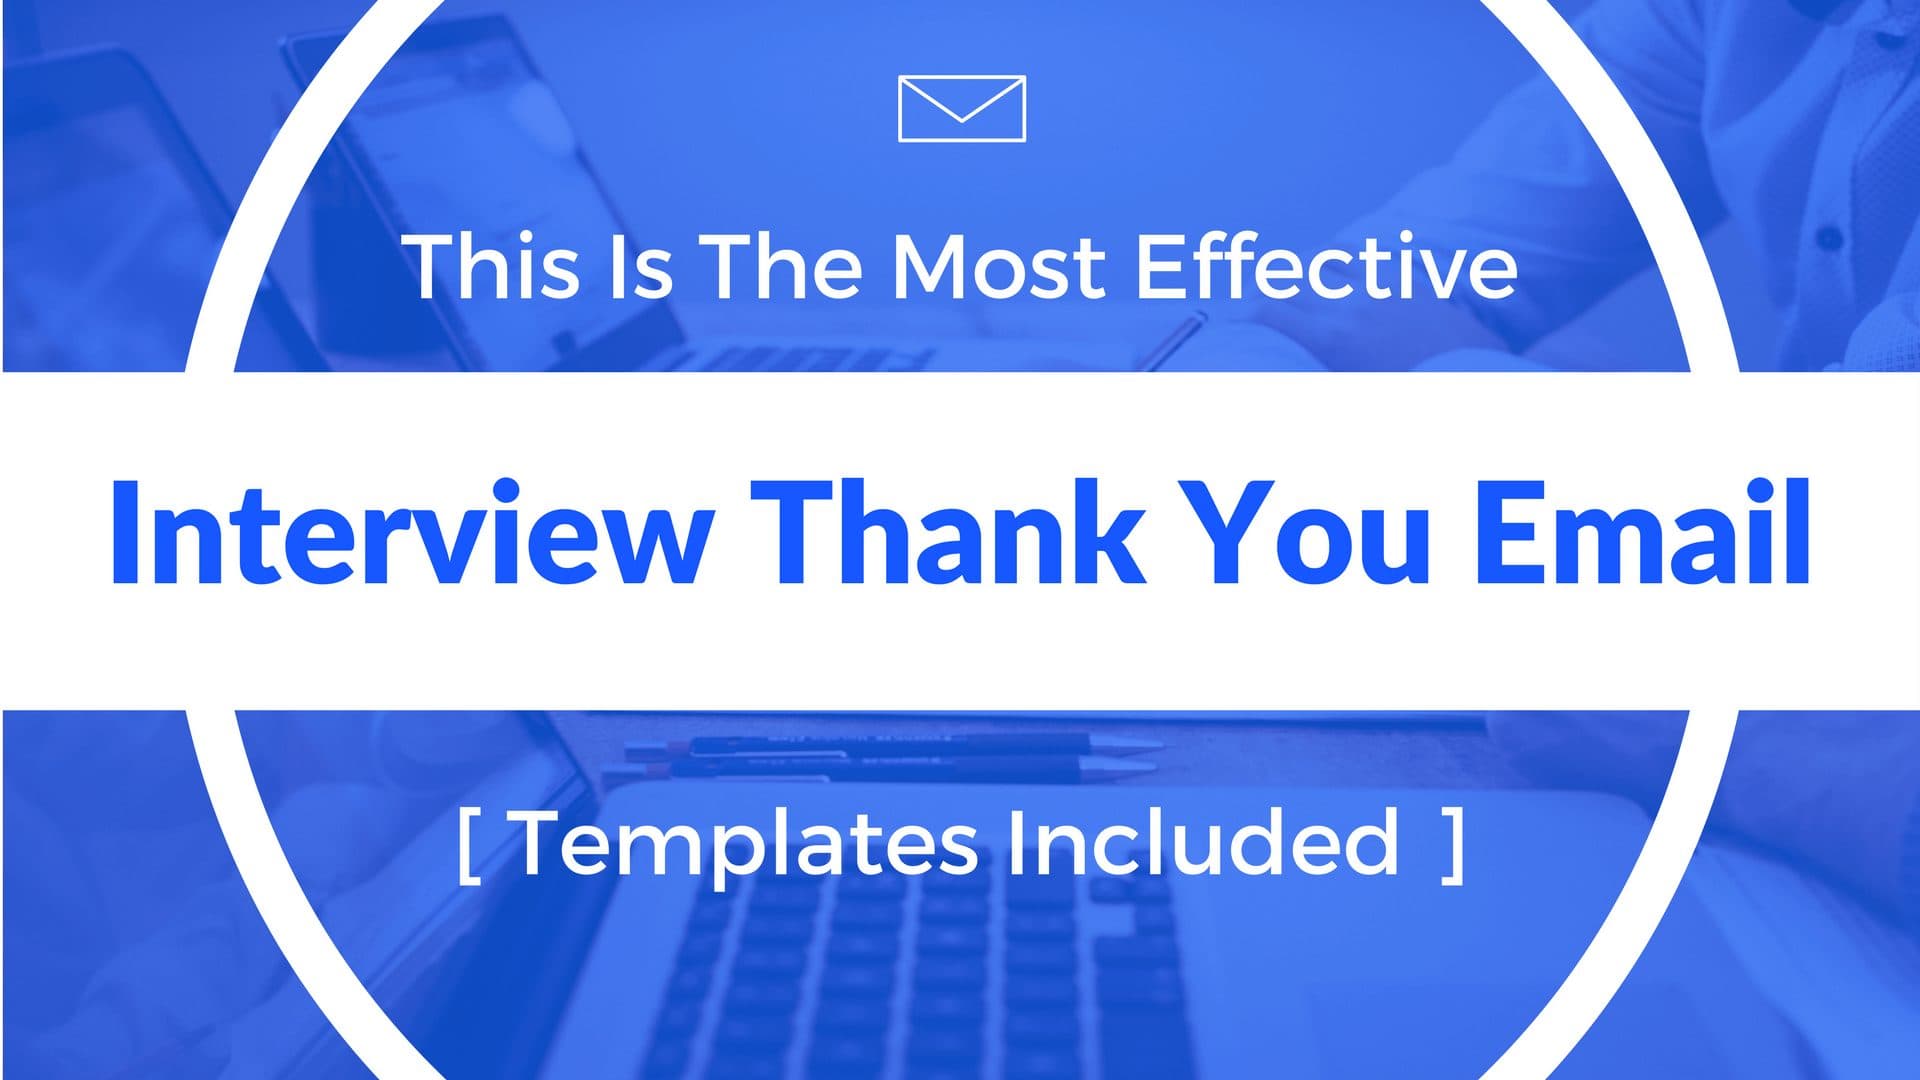 Interview Thank You Email Template from cultivatedculture.com